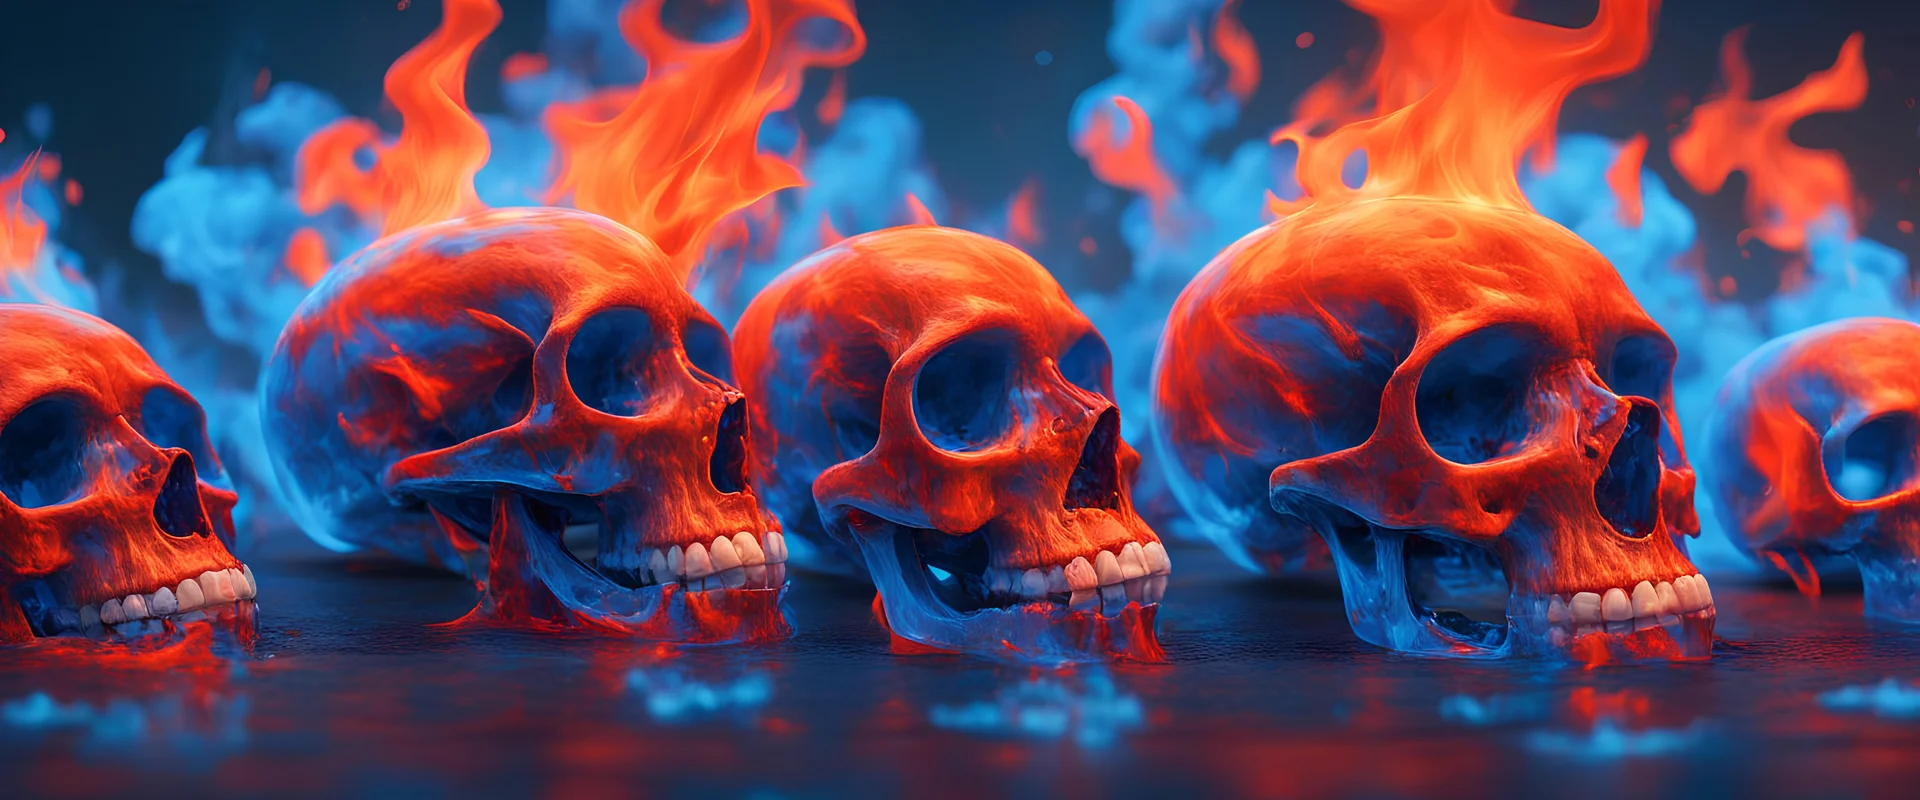 multiple glass human skulls, high temperature, glowing blue on the bottom, glowing red on the top, large blue red and orange flame coming from under and behind hovering in high in the sky, contrasting colors precisionism psychedelic art surrealism street art digital illustration wet wash 64 megapixels 8K resolution 8K resolution telephoto lens telephoto sharp focus Unreal Engine 5 VRay radiant retro futuristic galactic